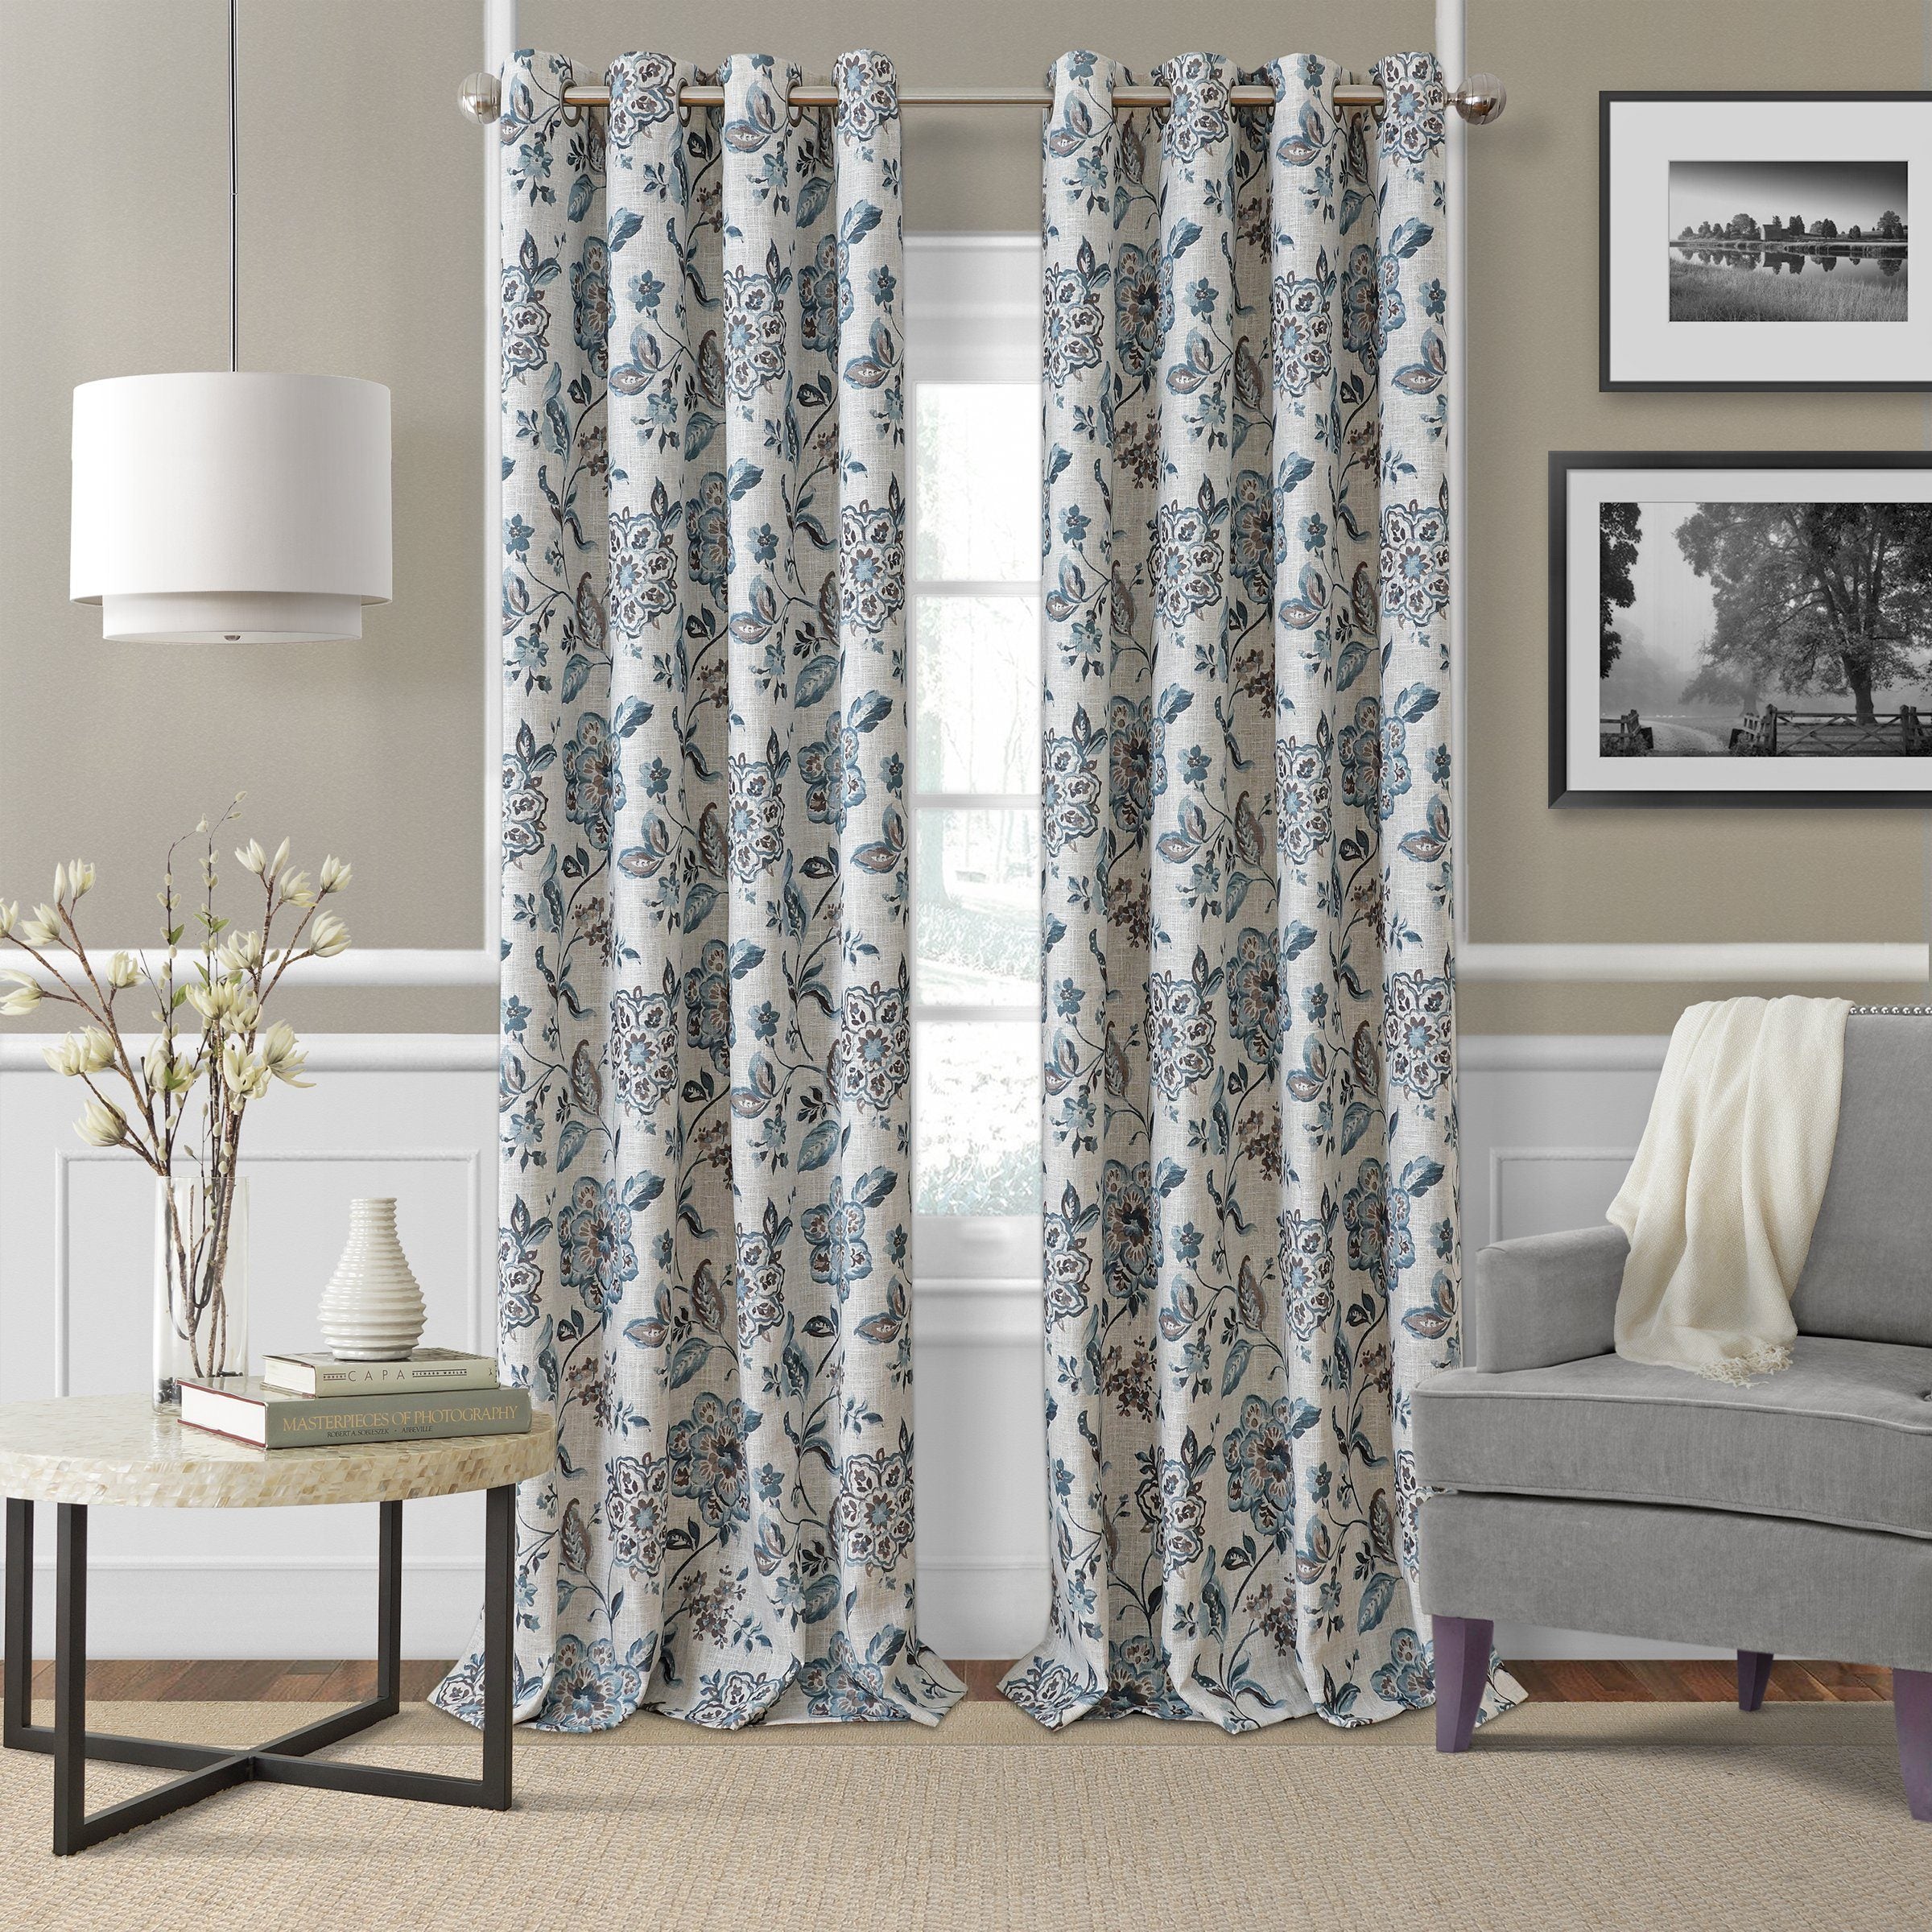 Sorrento Jacobean Floral Window Curtain Collection - Clearance